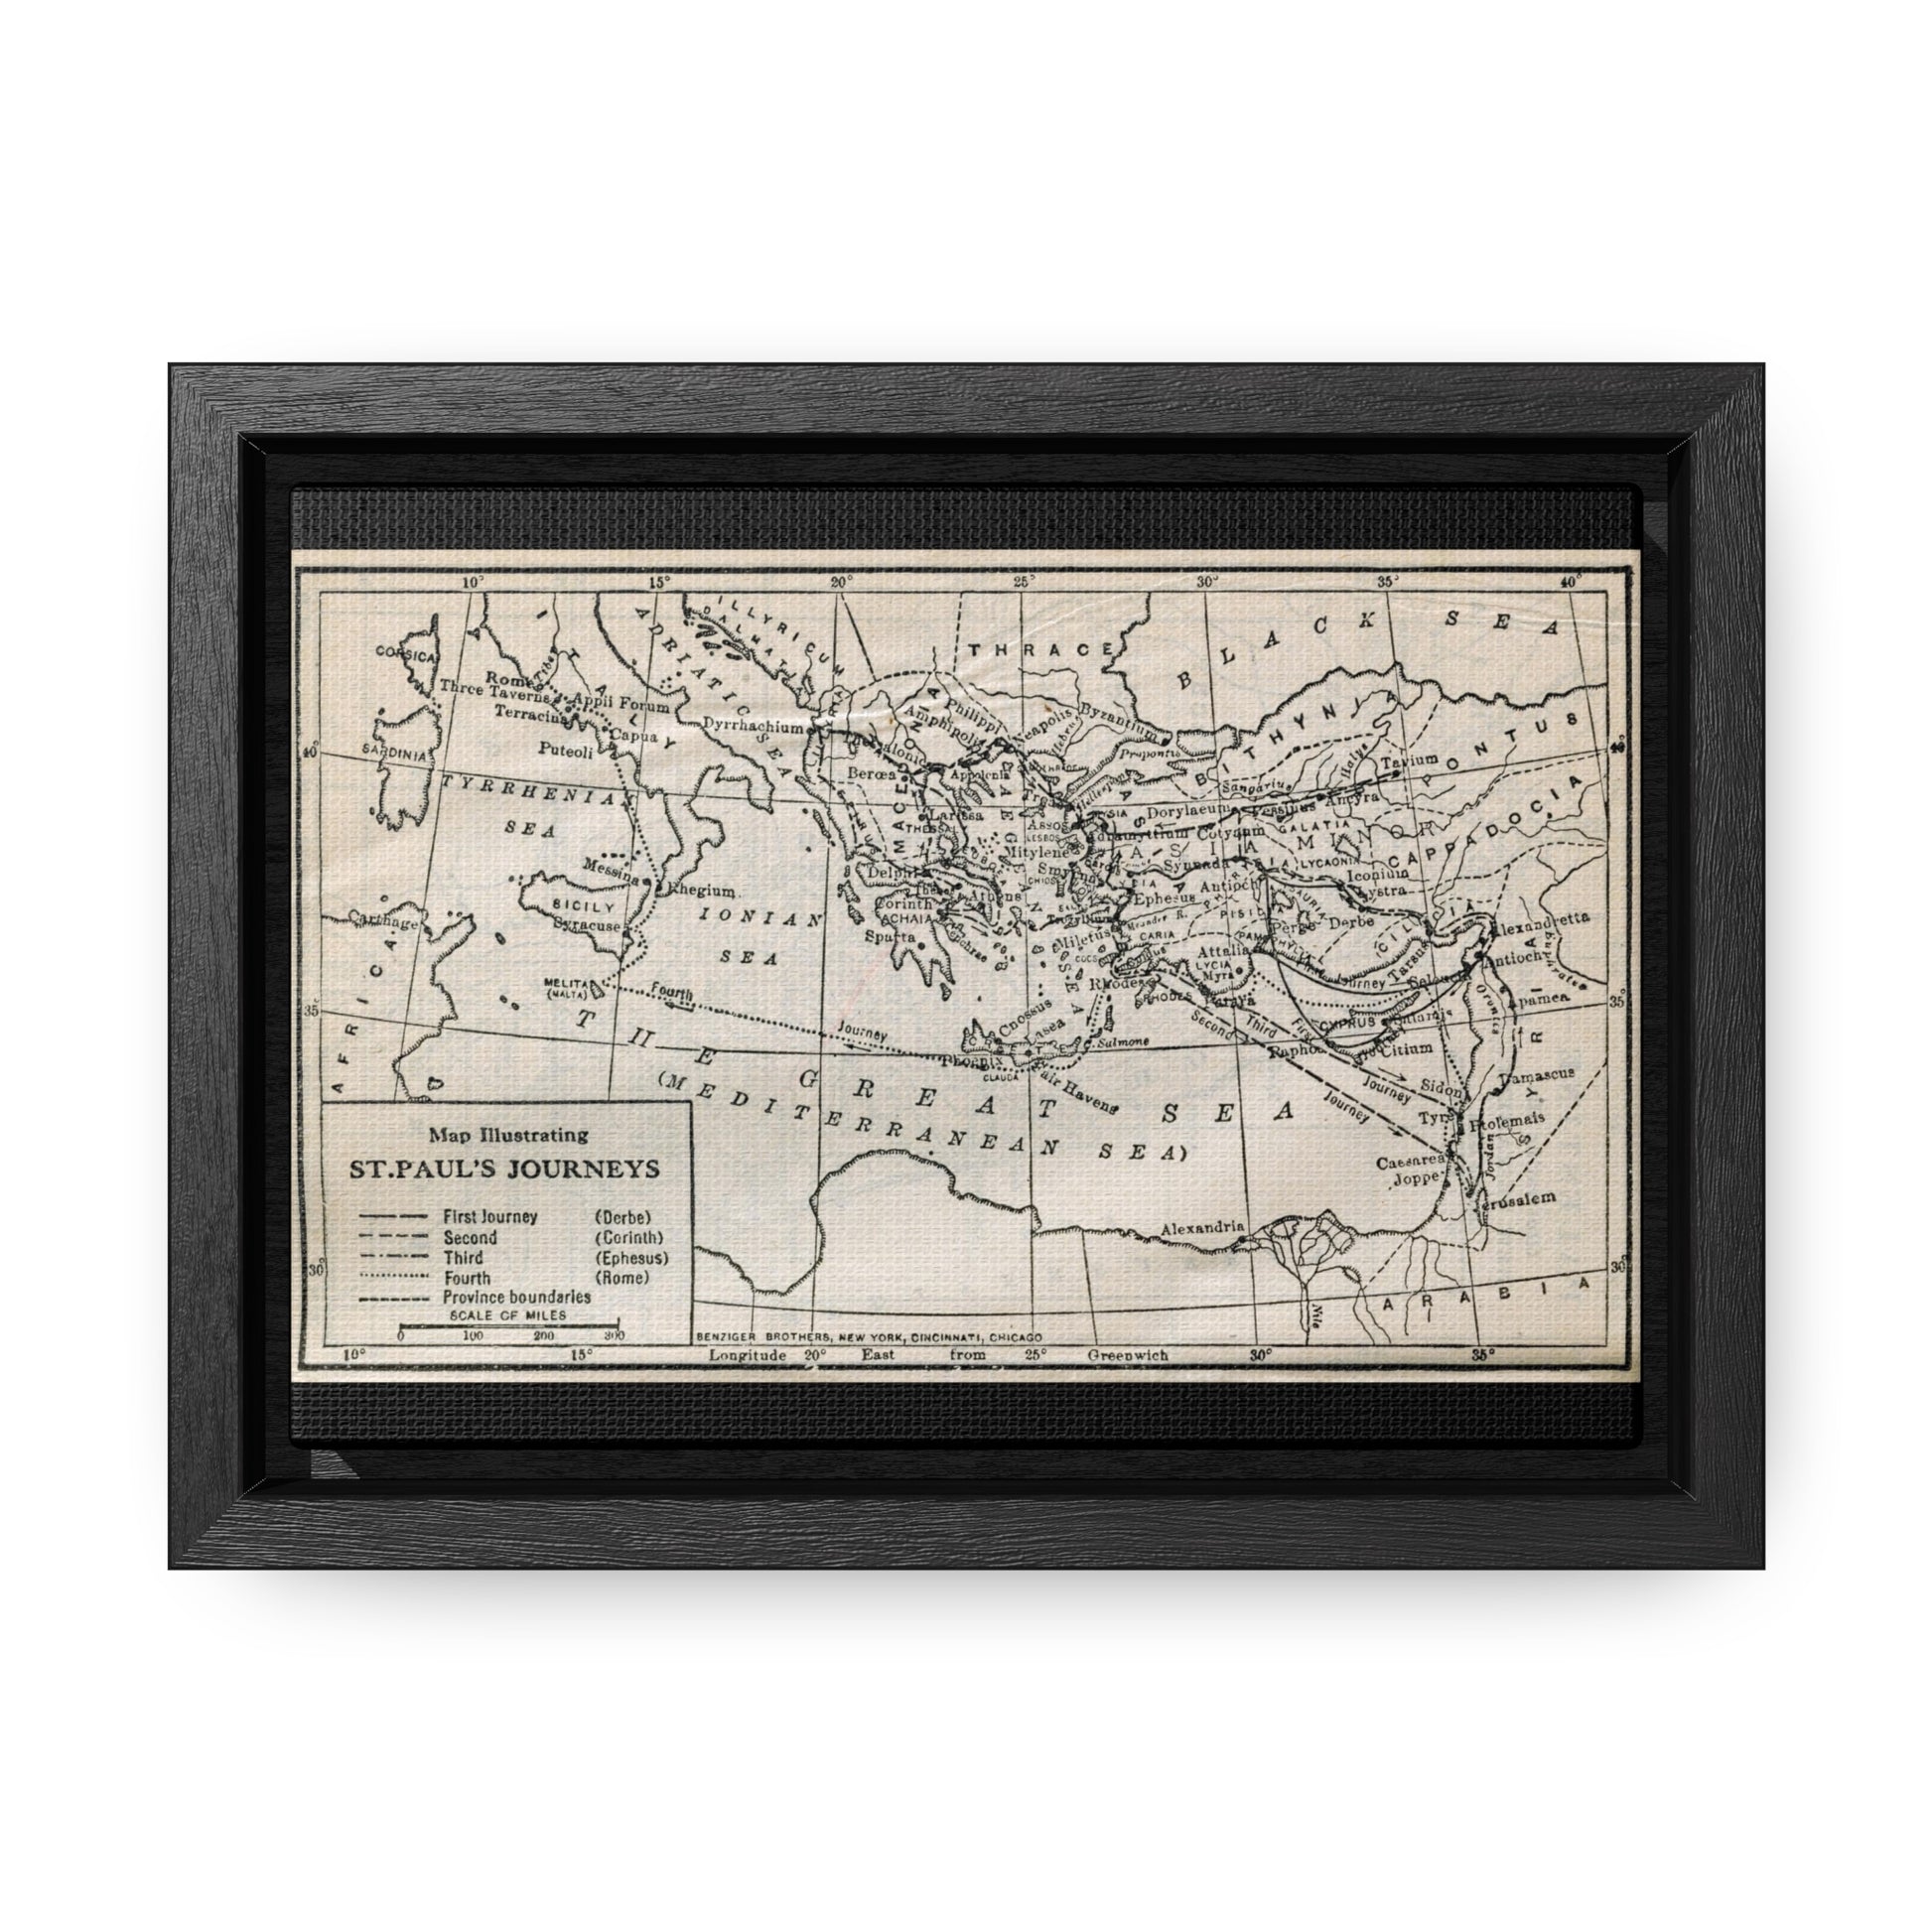 St. Paul's Journeys Monotone Map - Framed Gallery Wrap Canvas 7"x5" - Studio Lams Creative Collective